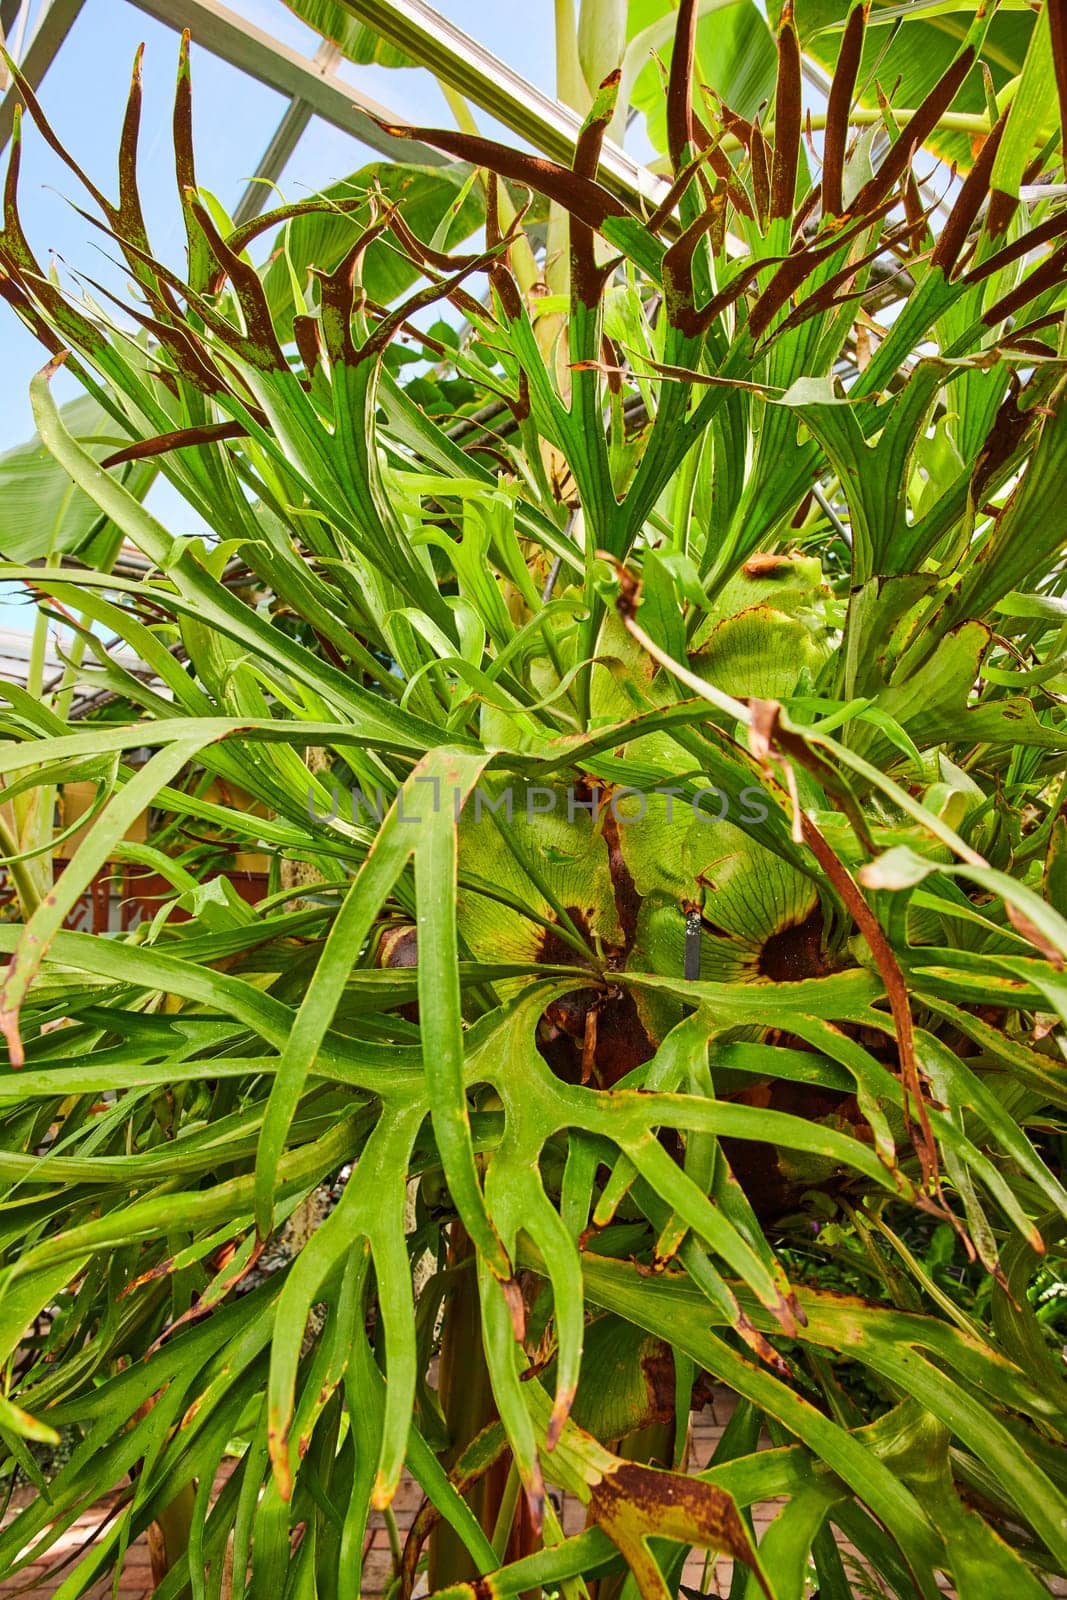 Vibrant Staghorn Fern Close-Up in Greenhouse by njproductions